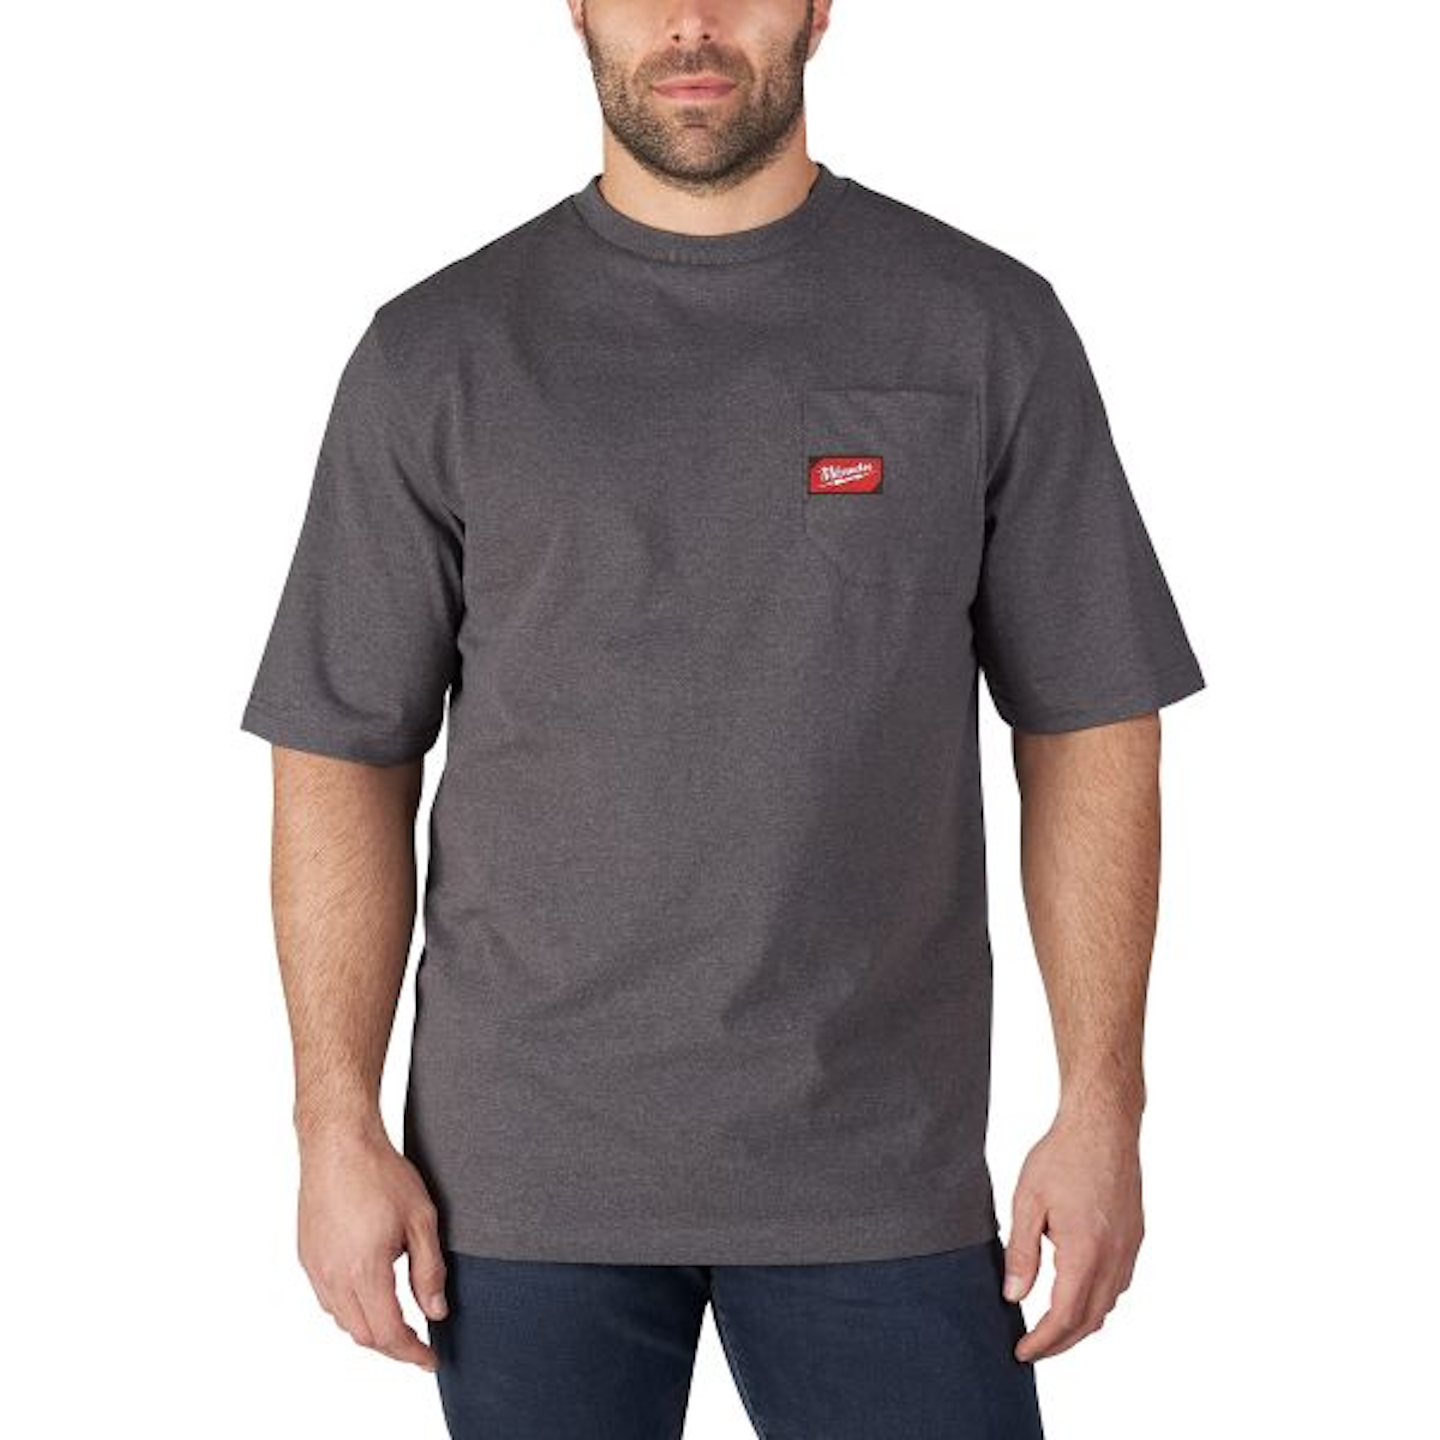 Heavy Duty Pocket T-Shirts From: Milwaukee Electric Tool Corp ...